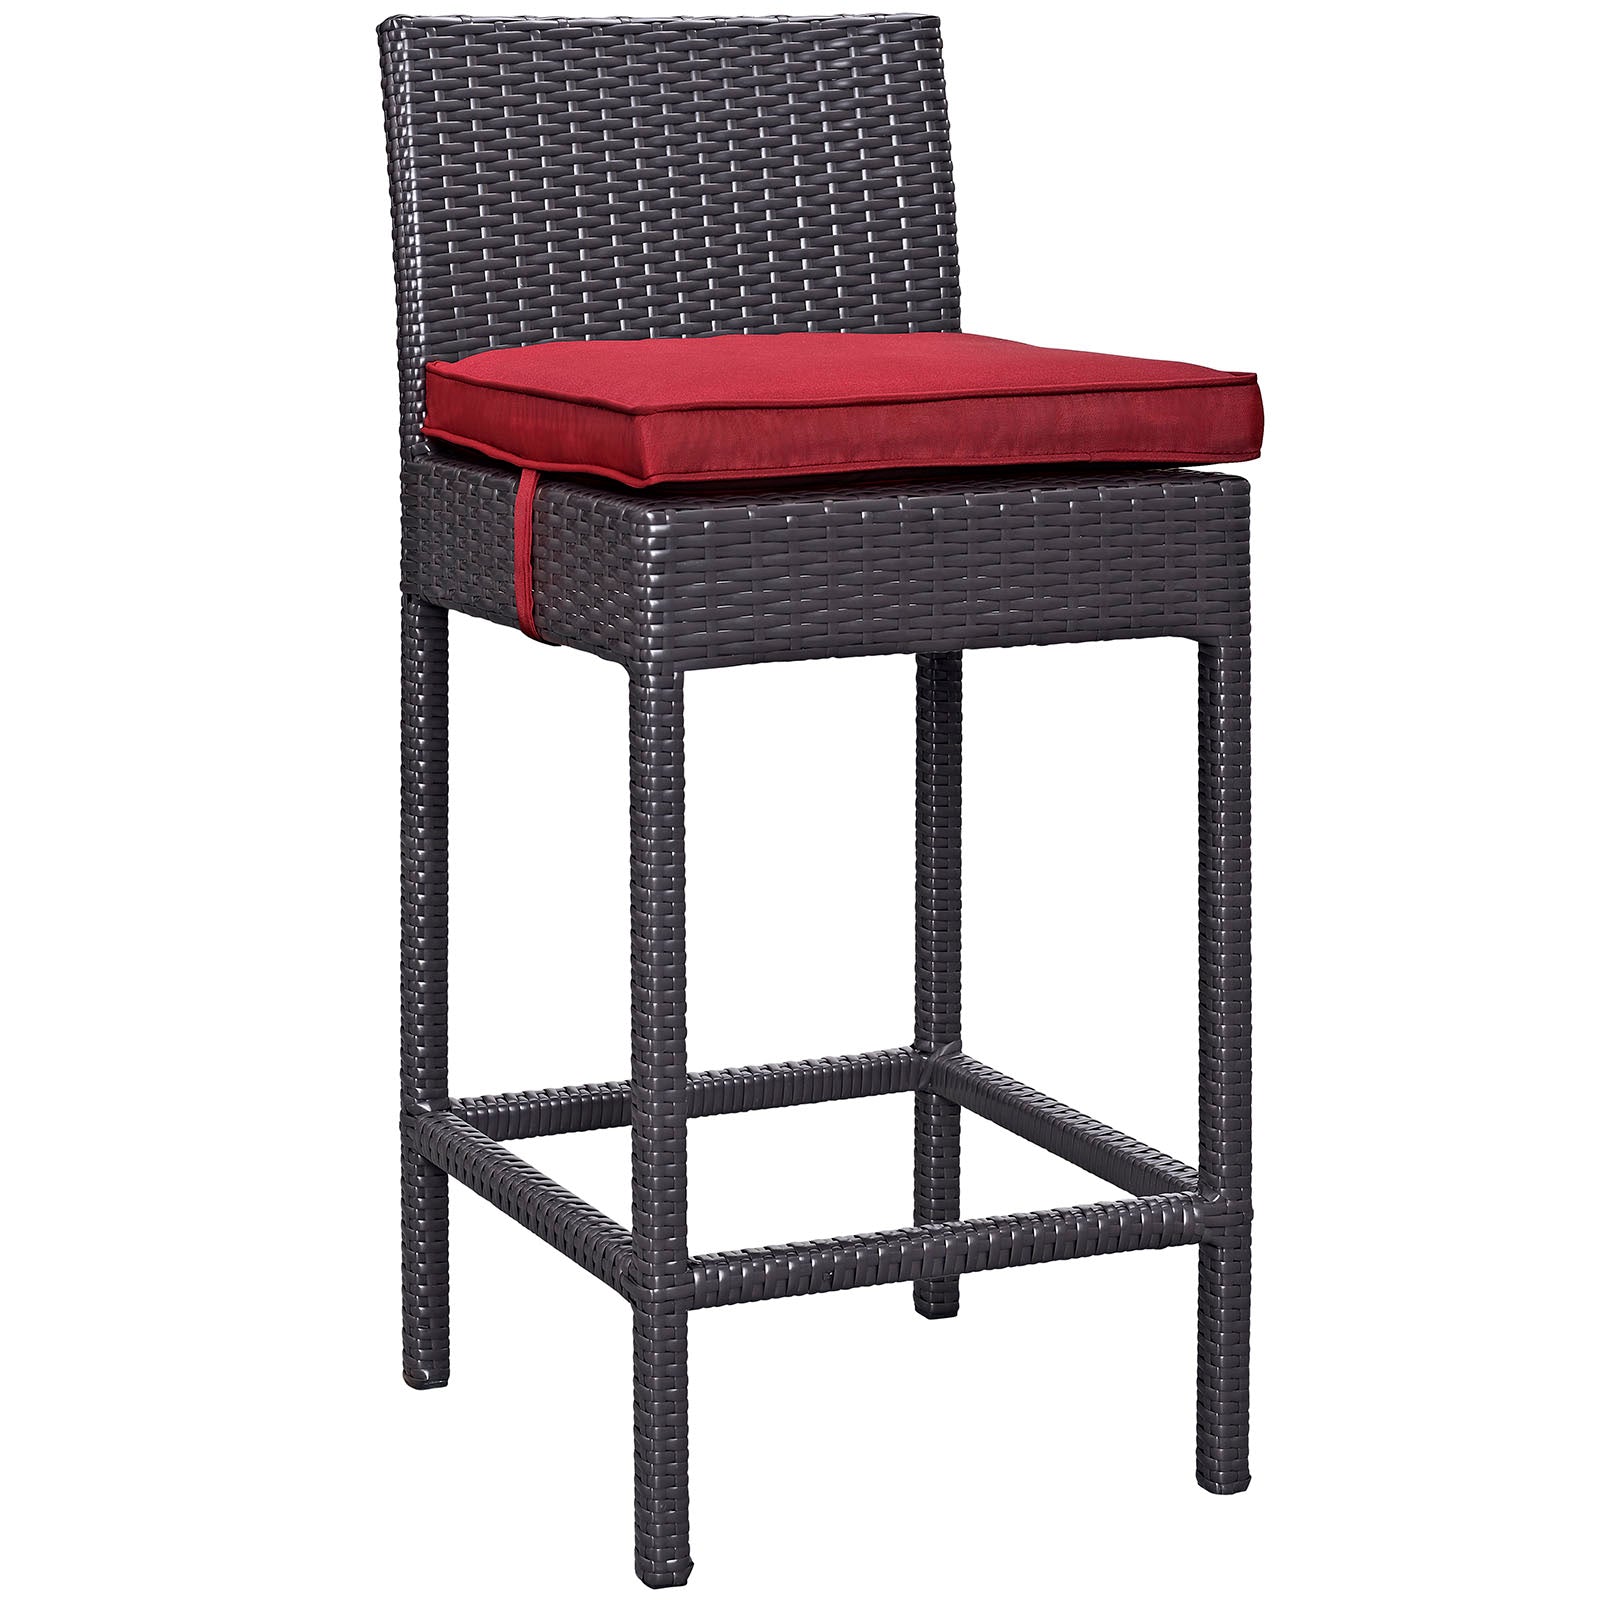 Modway Outdoor Barstools - Lift Bar Stool Outdoor Patio ( Set of 2 ) Espresso Red